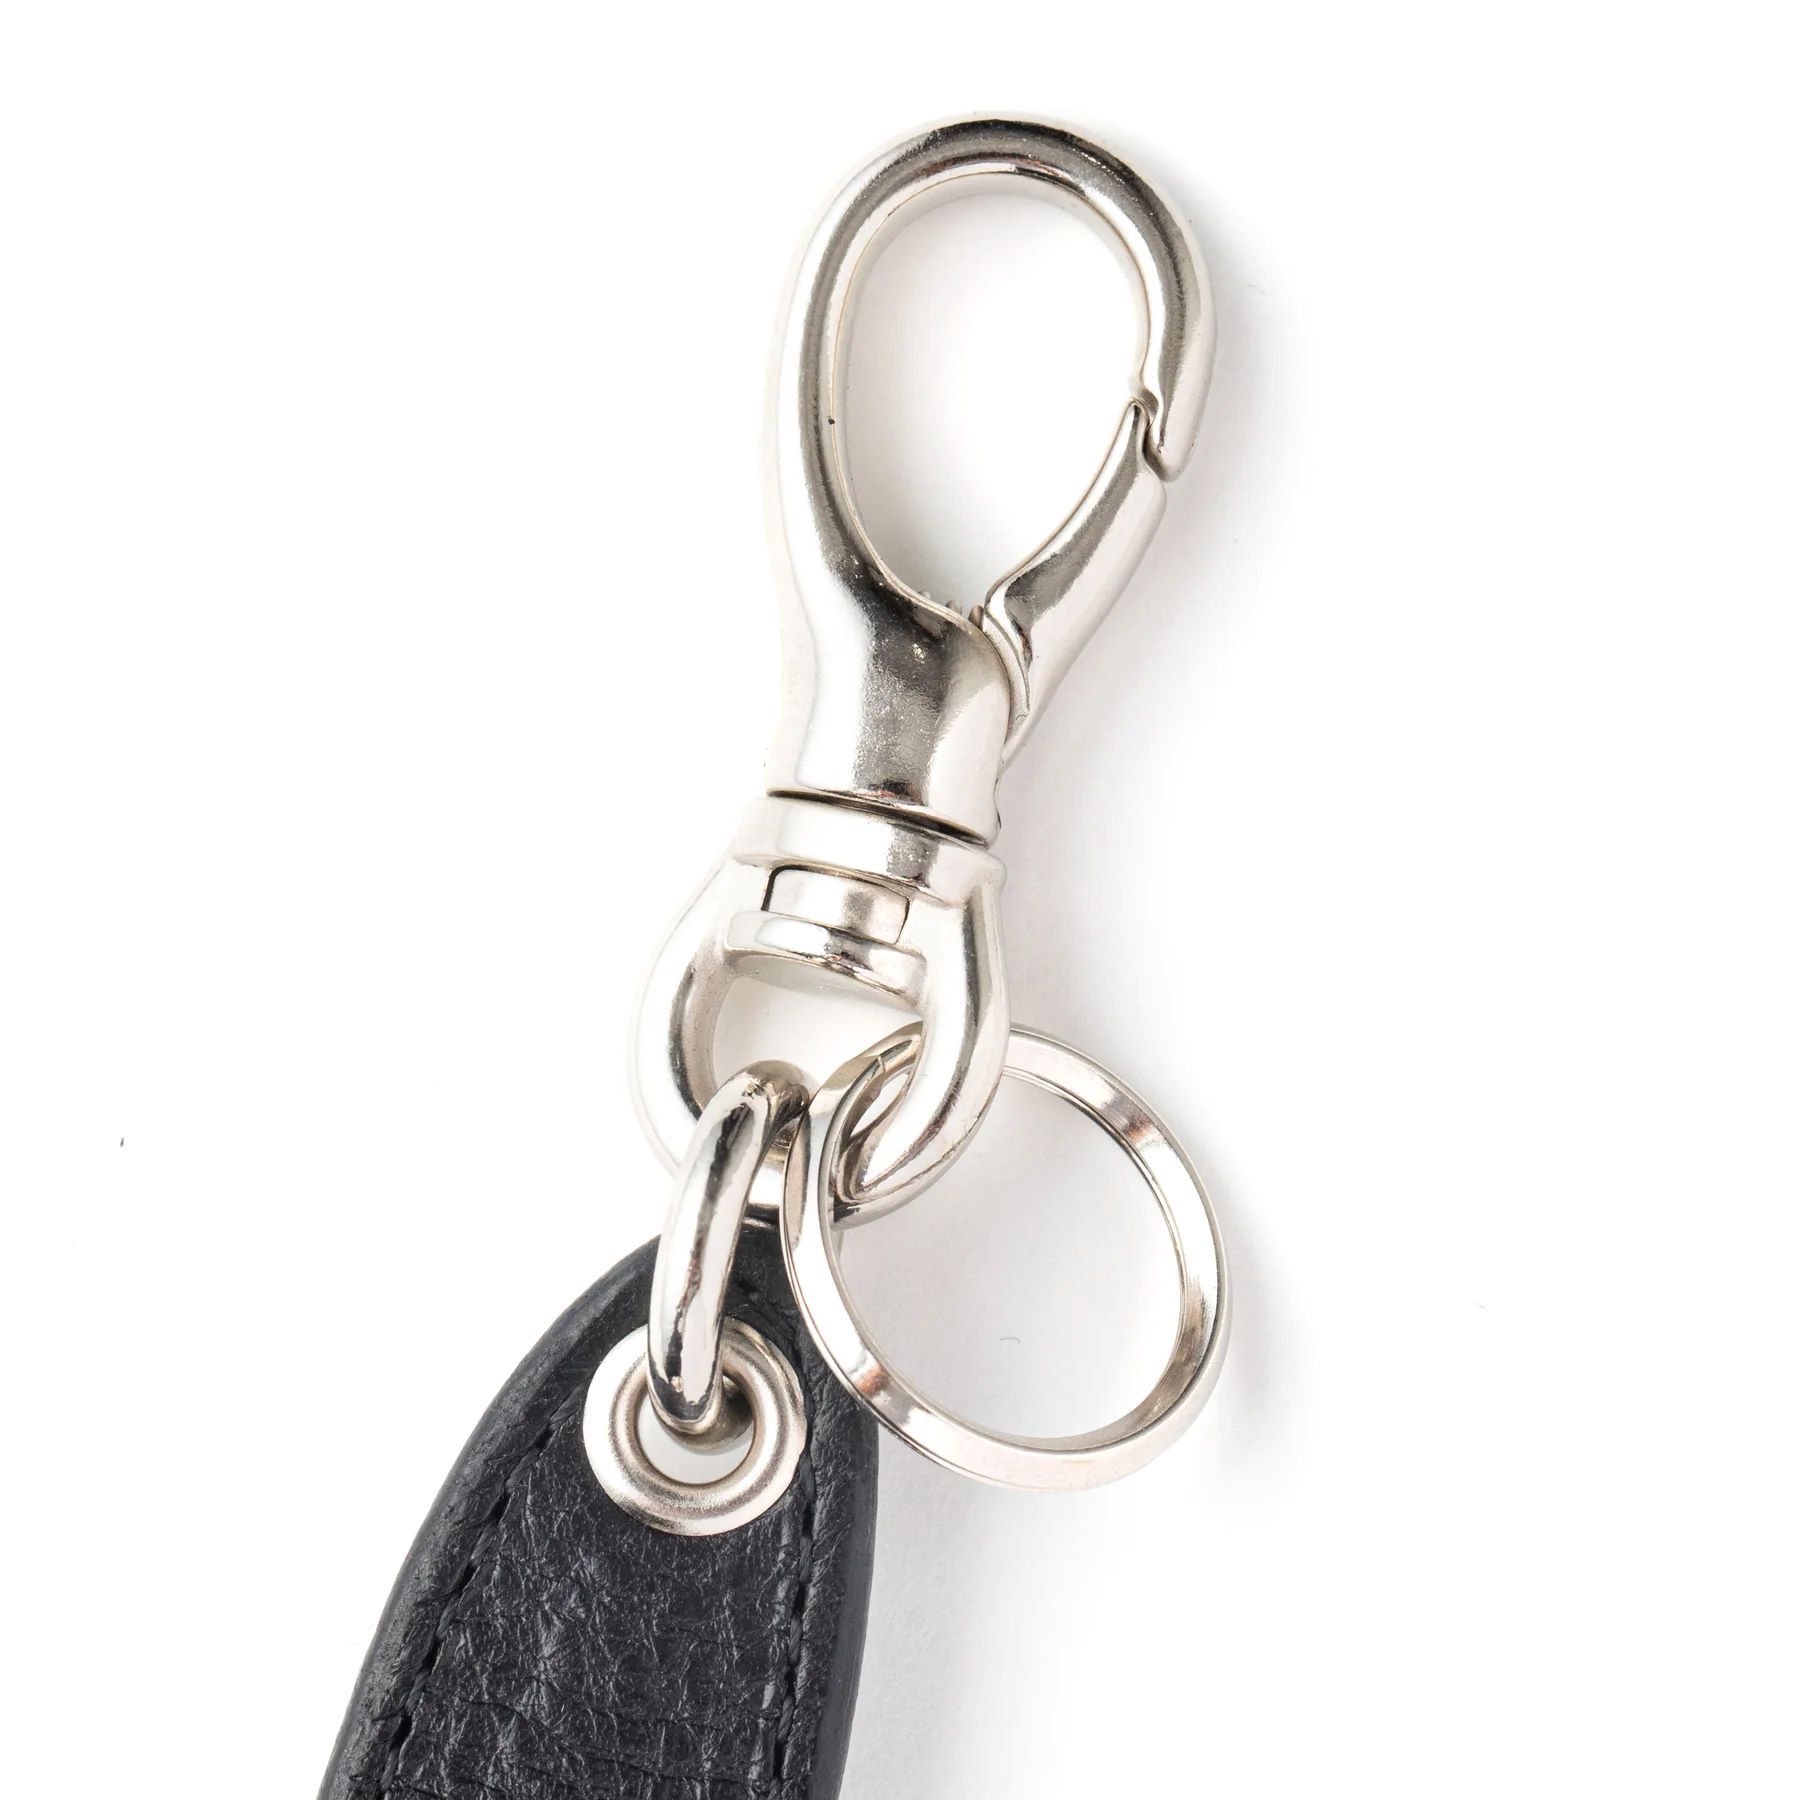 CALEE STUDS LEATHER ASSORT KEY RING ＜TYPE III＞ B CL-24SS021LE 公式通販